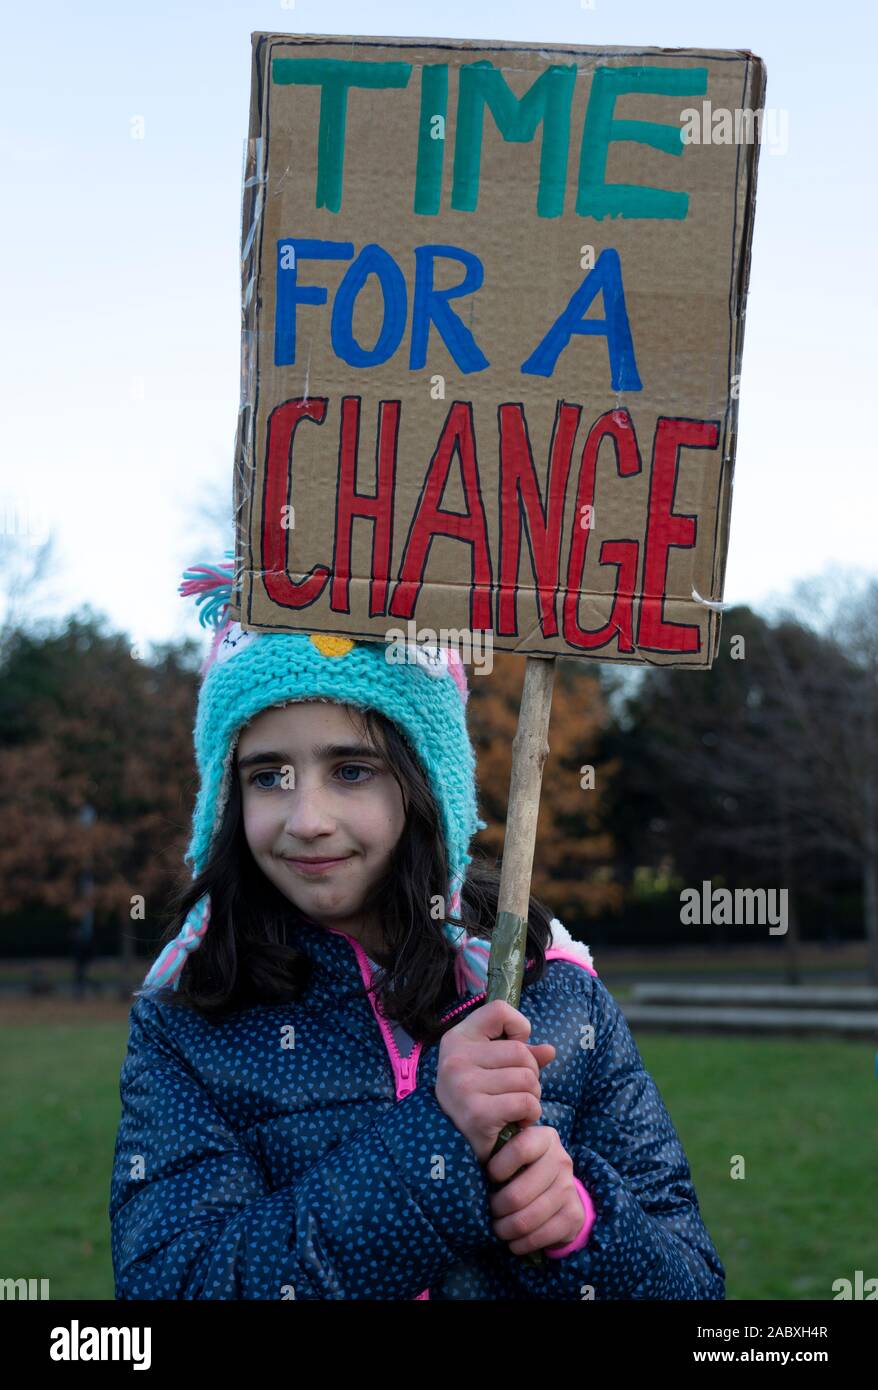 Edinburgh, Scotland, UK. 29th Nov, 2019. Young protestors gathered outside the Scottish Parliament building in Holyrood, Edinburgh to mark Global Climate Action Day. Similar protests occurred in many European cities. Credit: Iain Masterton/Alamy Live News Stock Photo